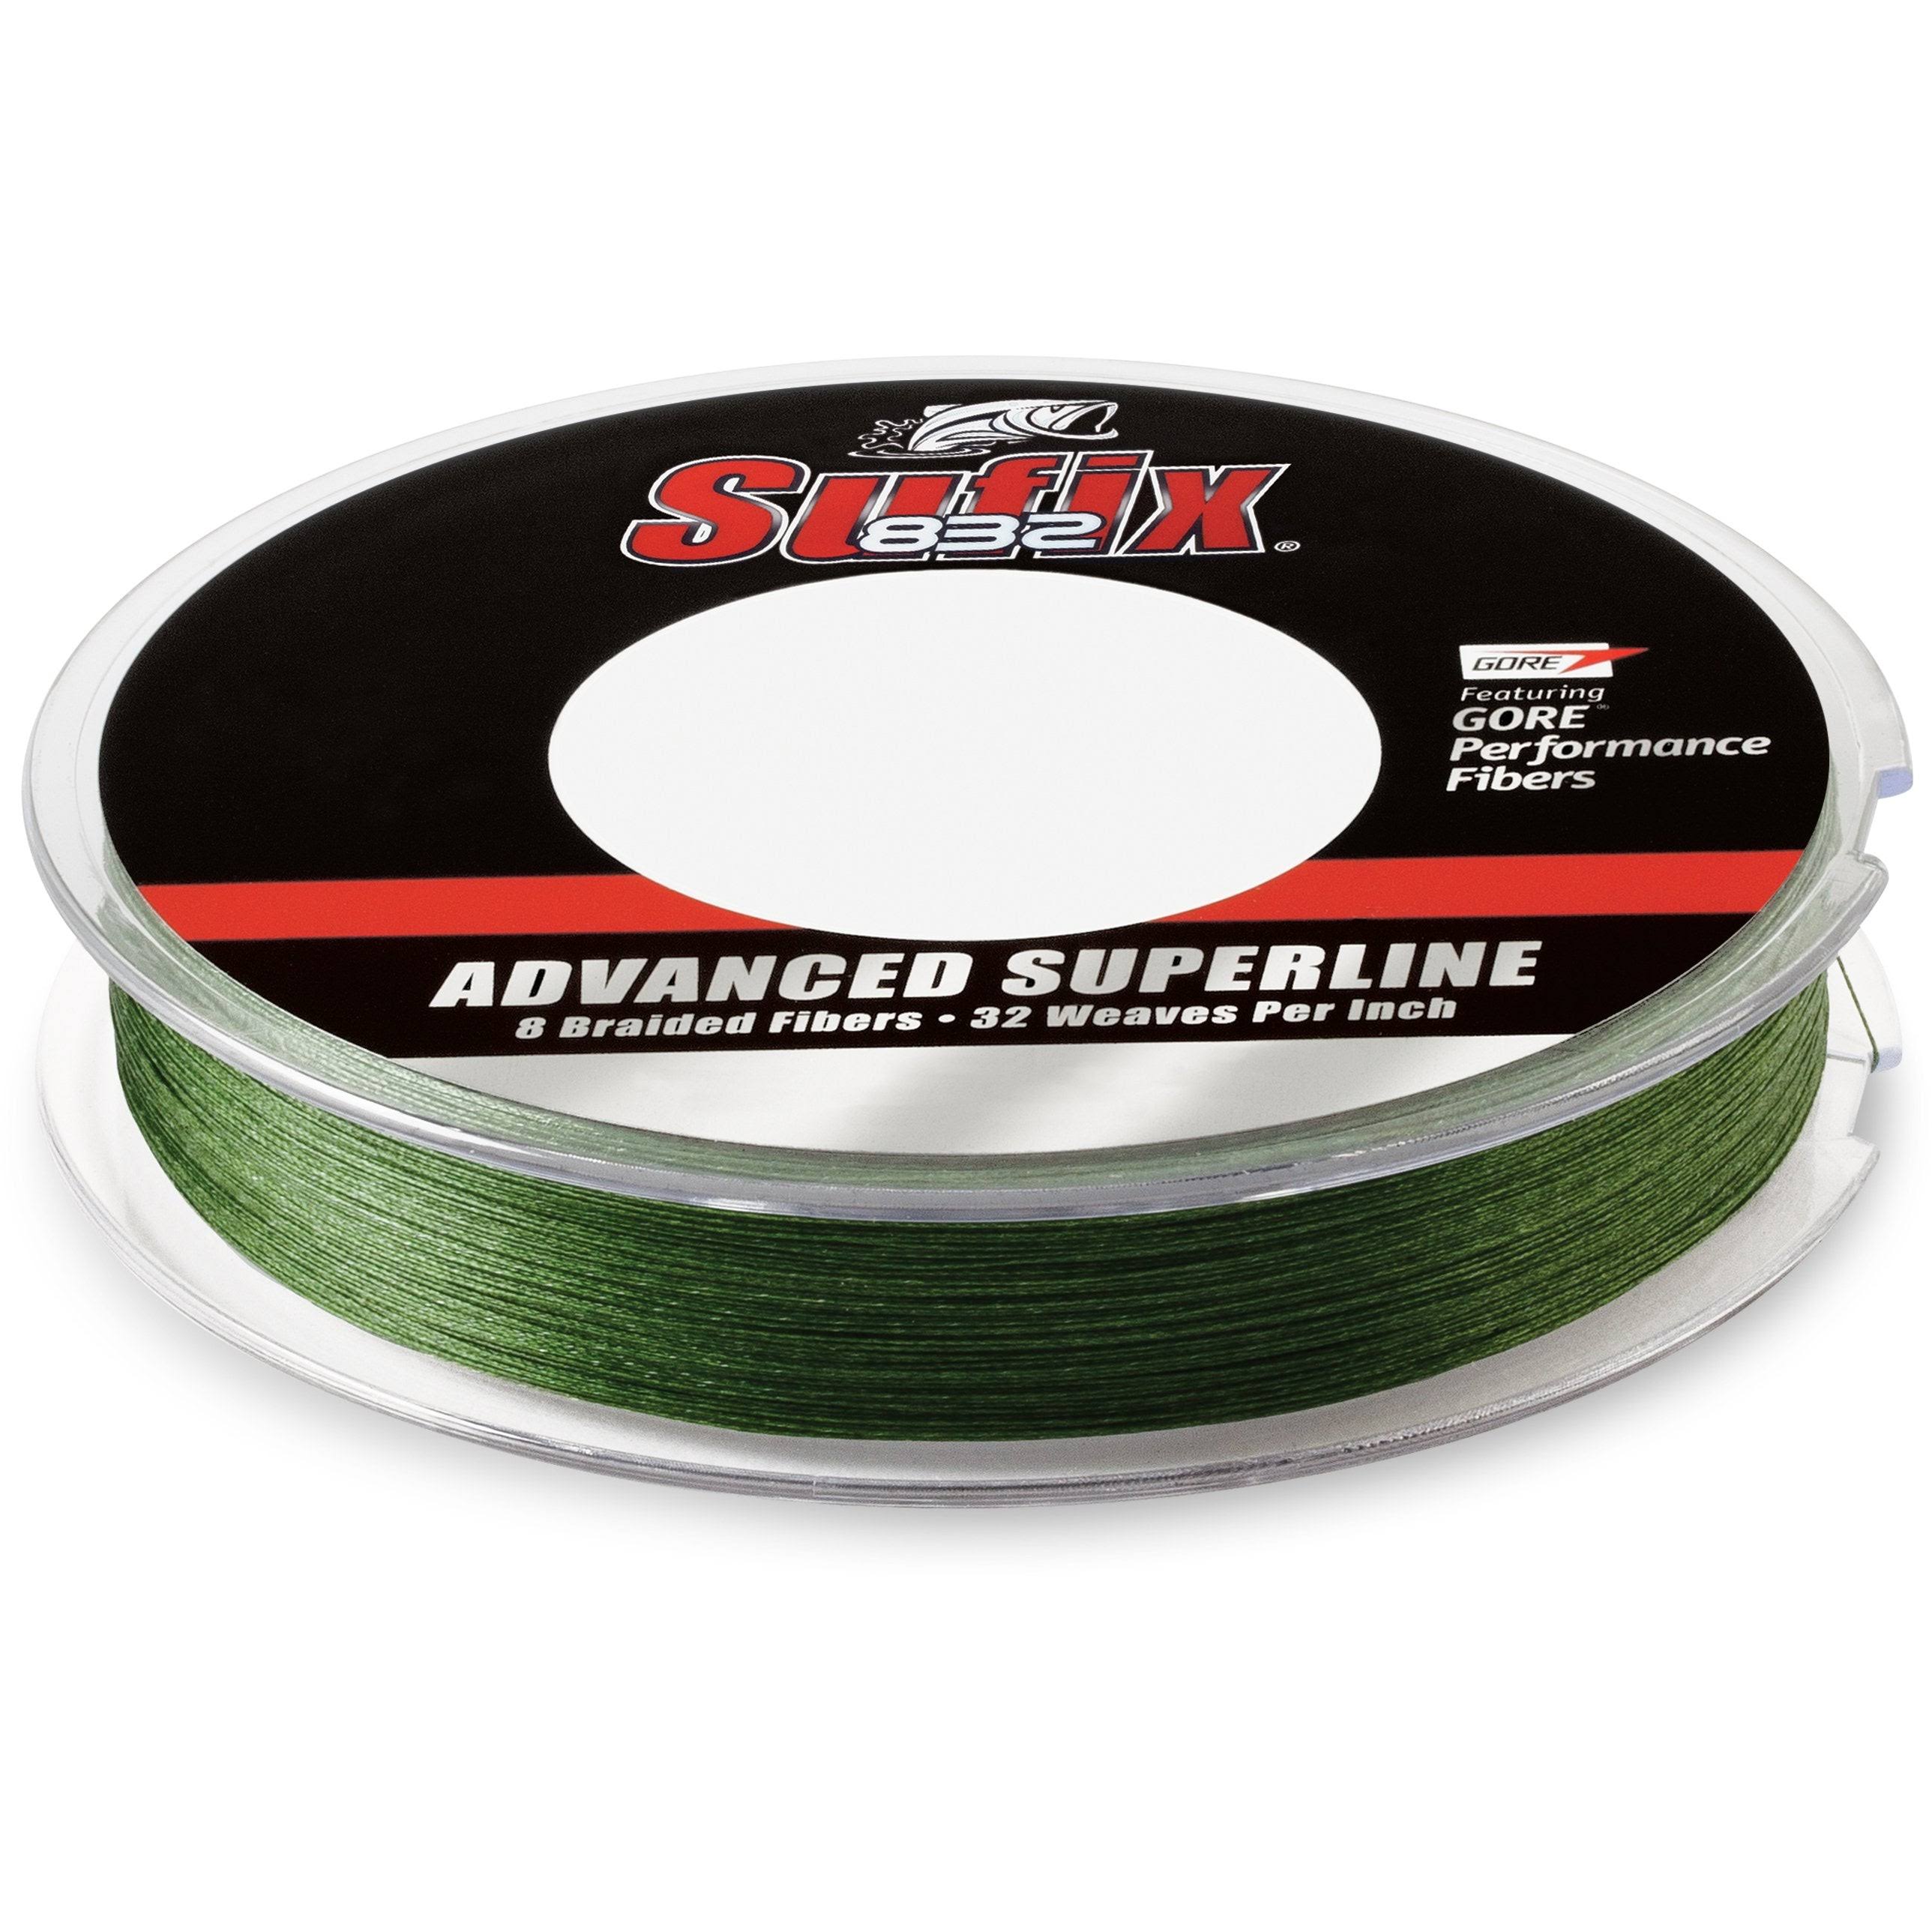 Sufix 832 Advanced Superline Braided Line - Low-Vis Green, 30lb Capacity, 300yd